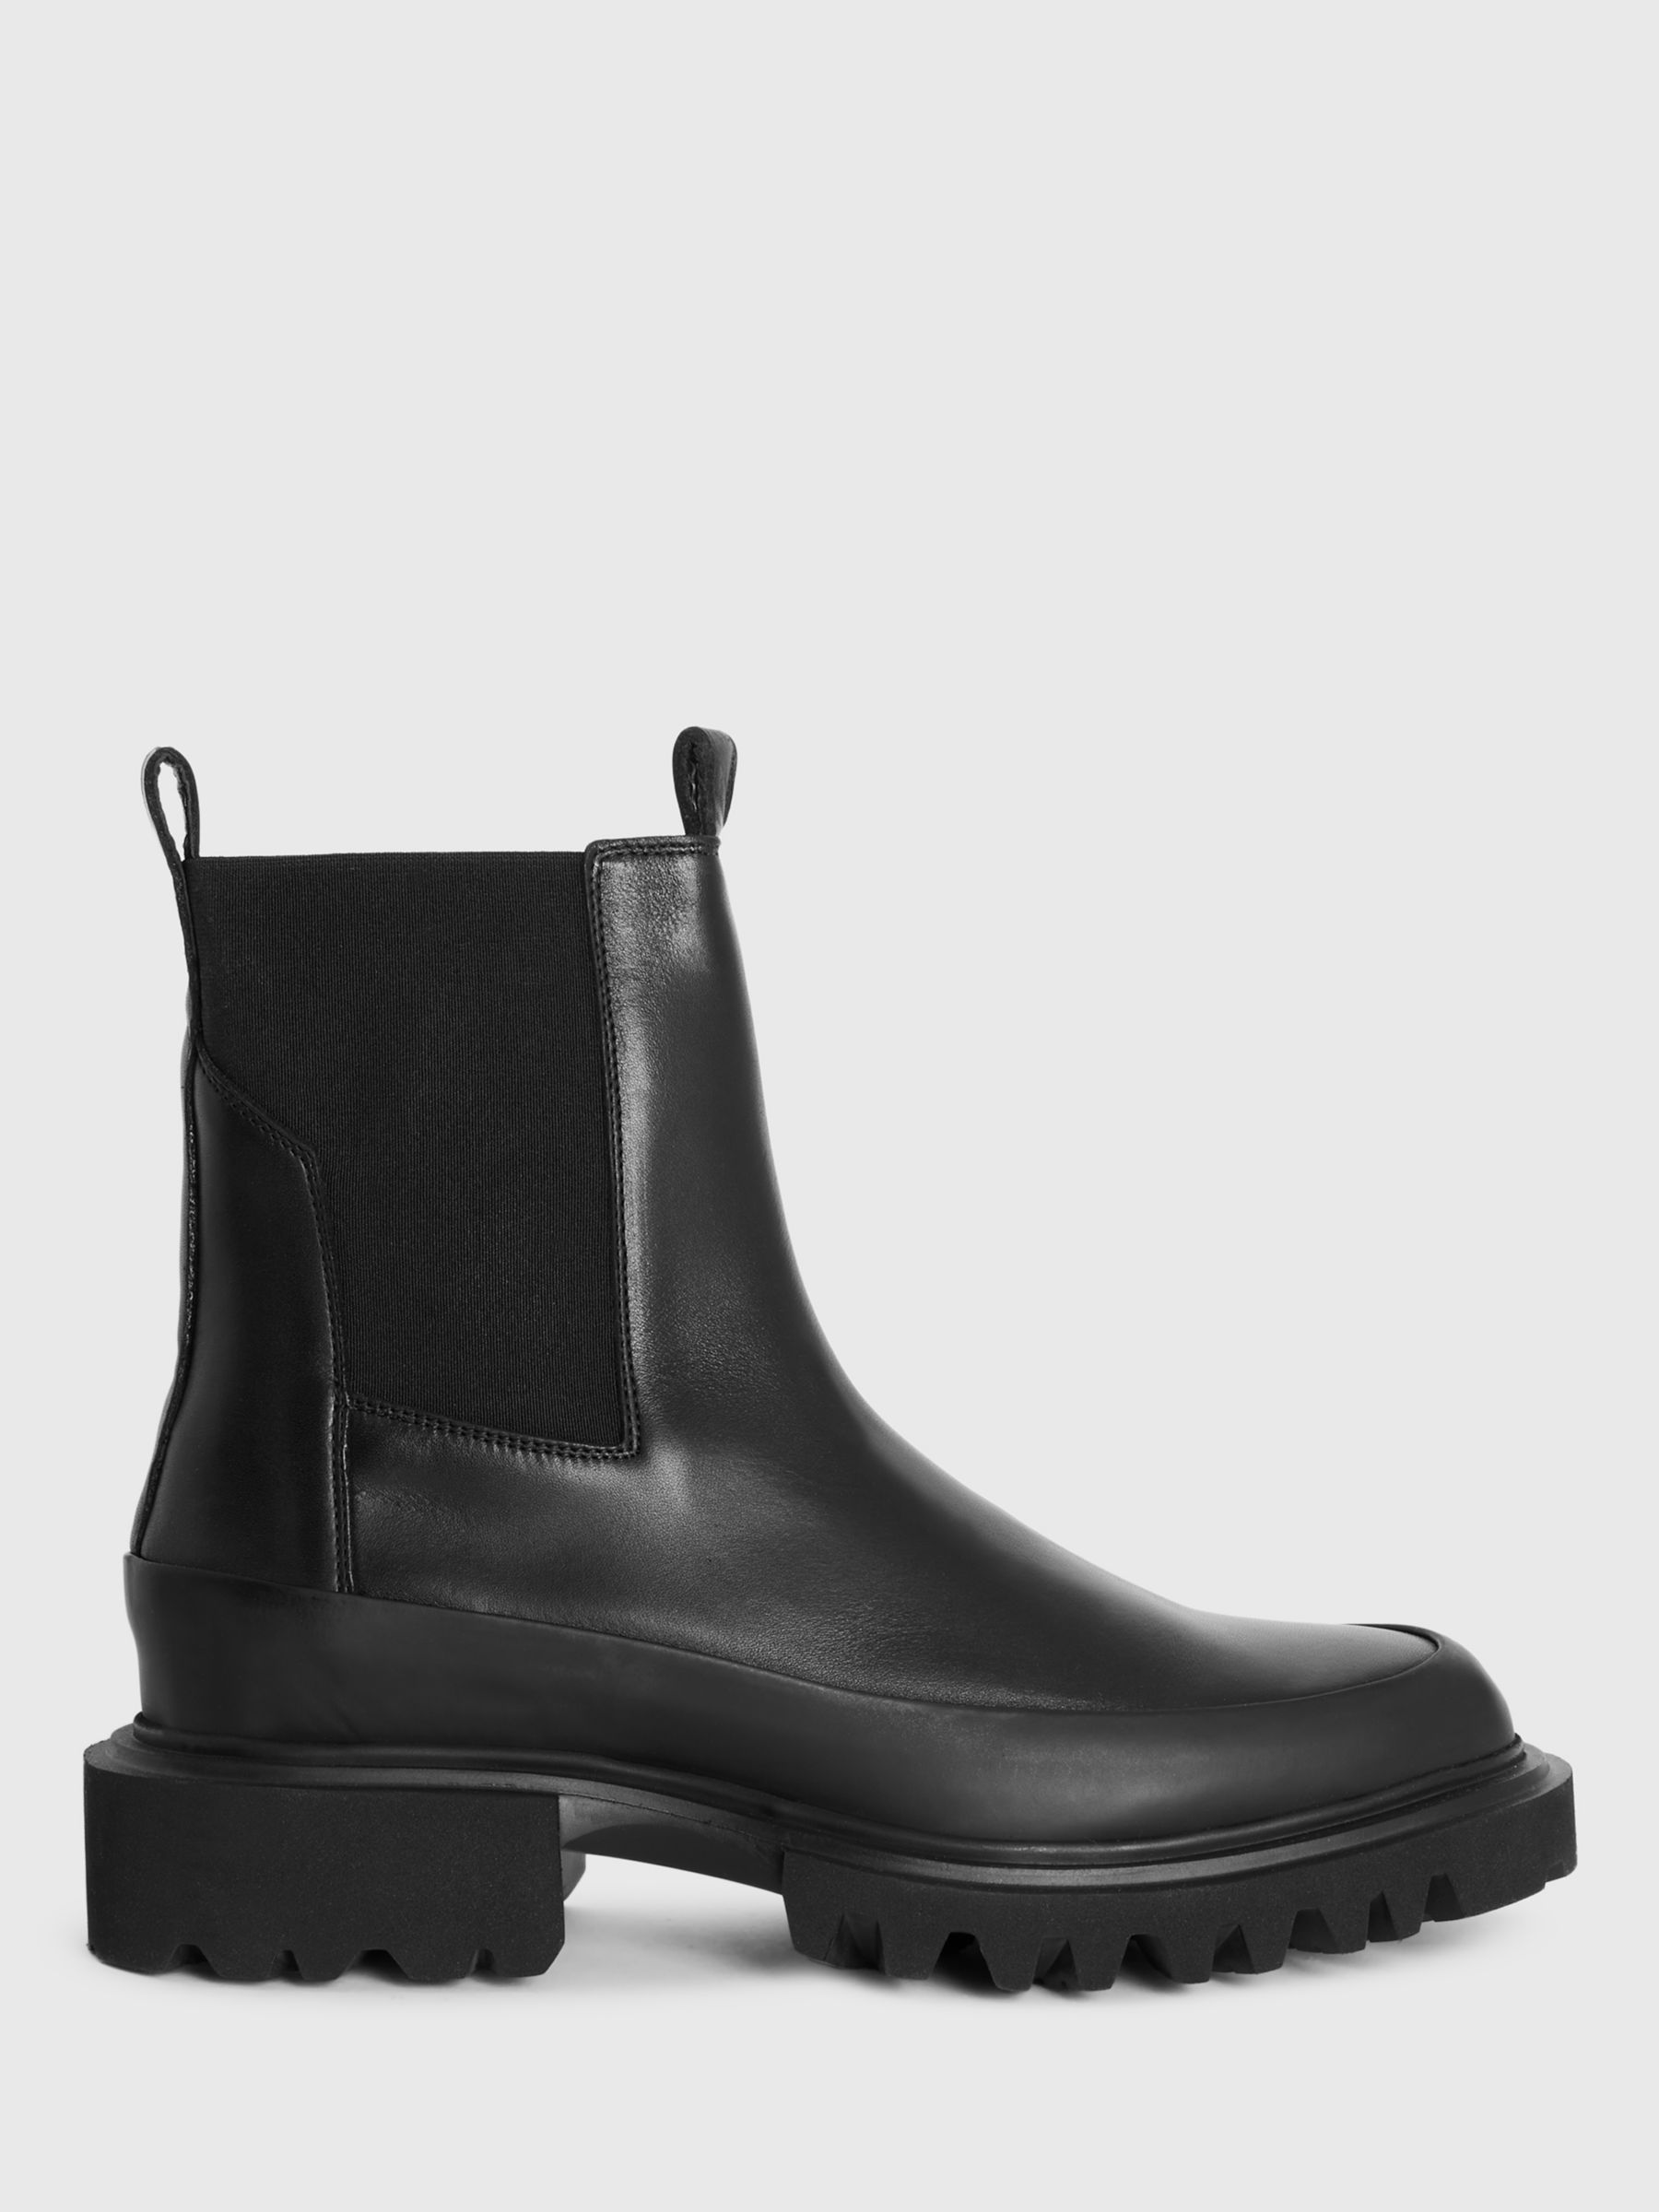 AllSaints Harlee Leather Ankle Boots, Black at John Lewis & Partners